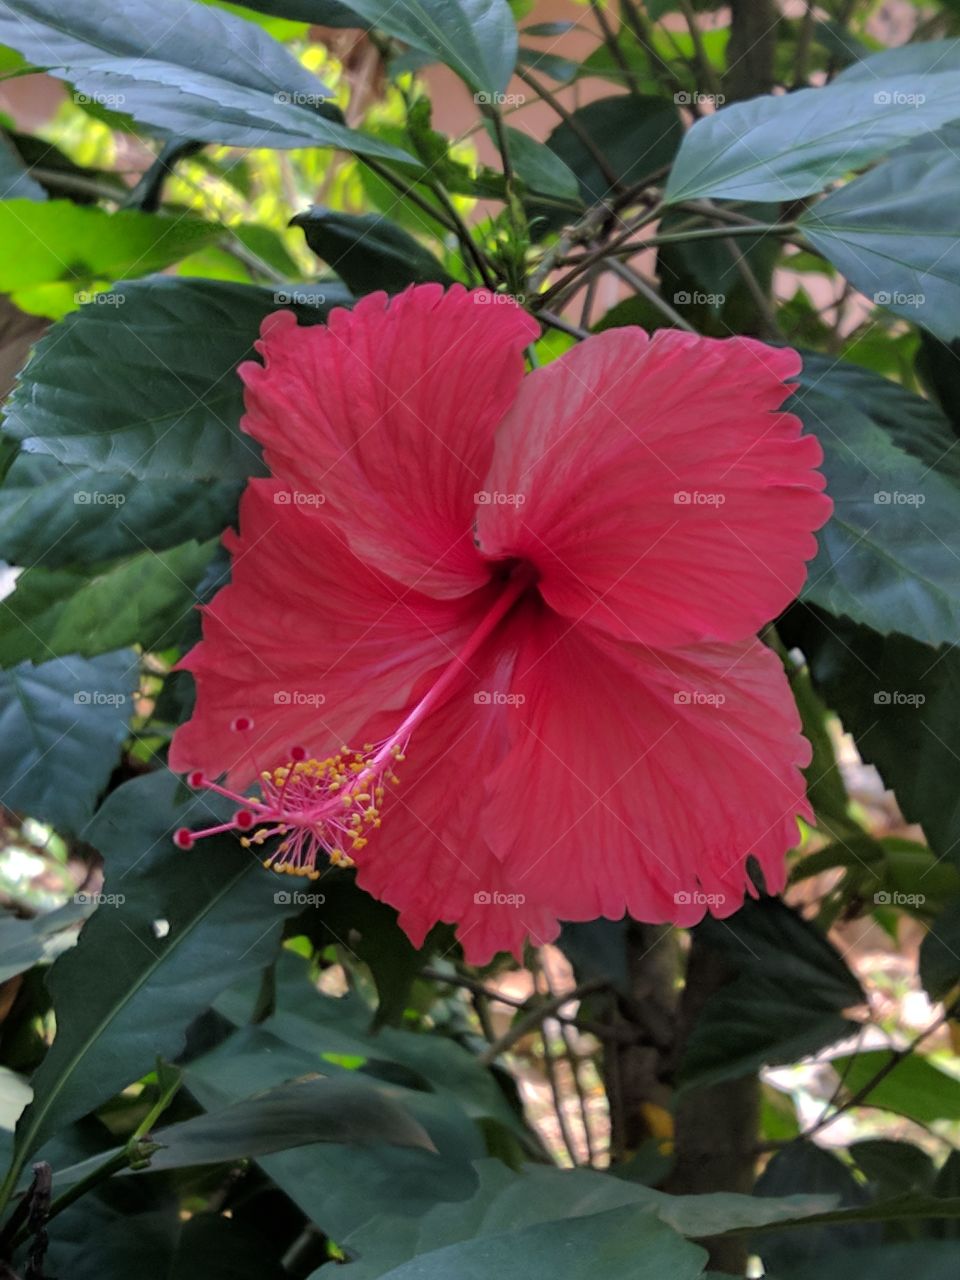 Lovely Hibiscus ......